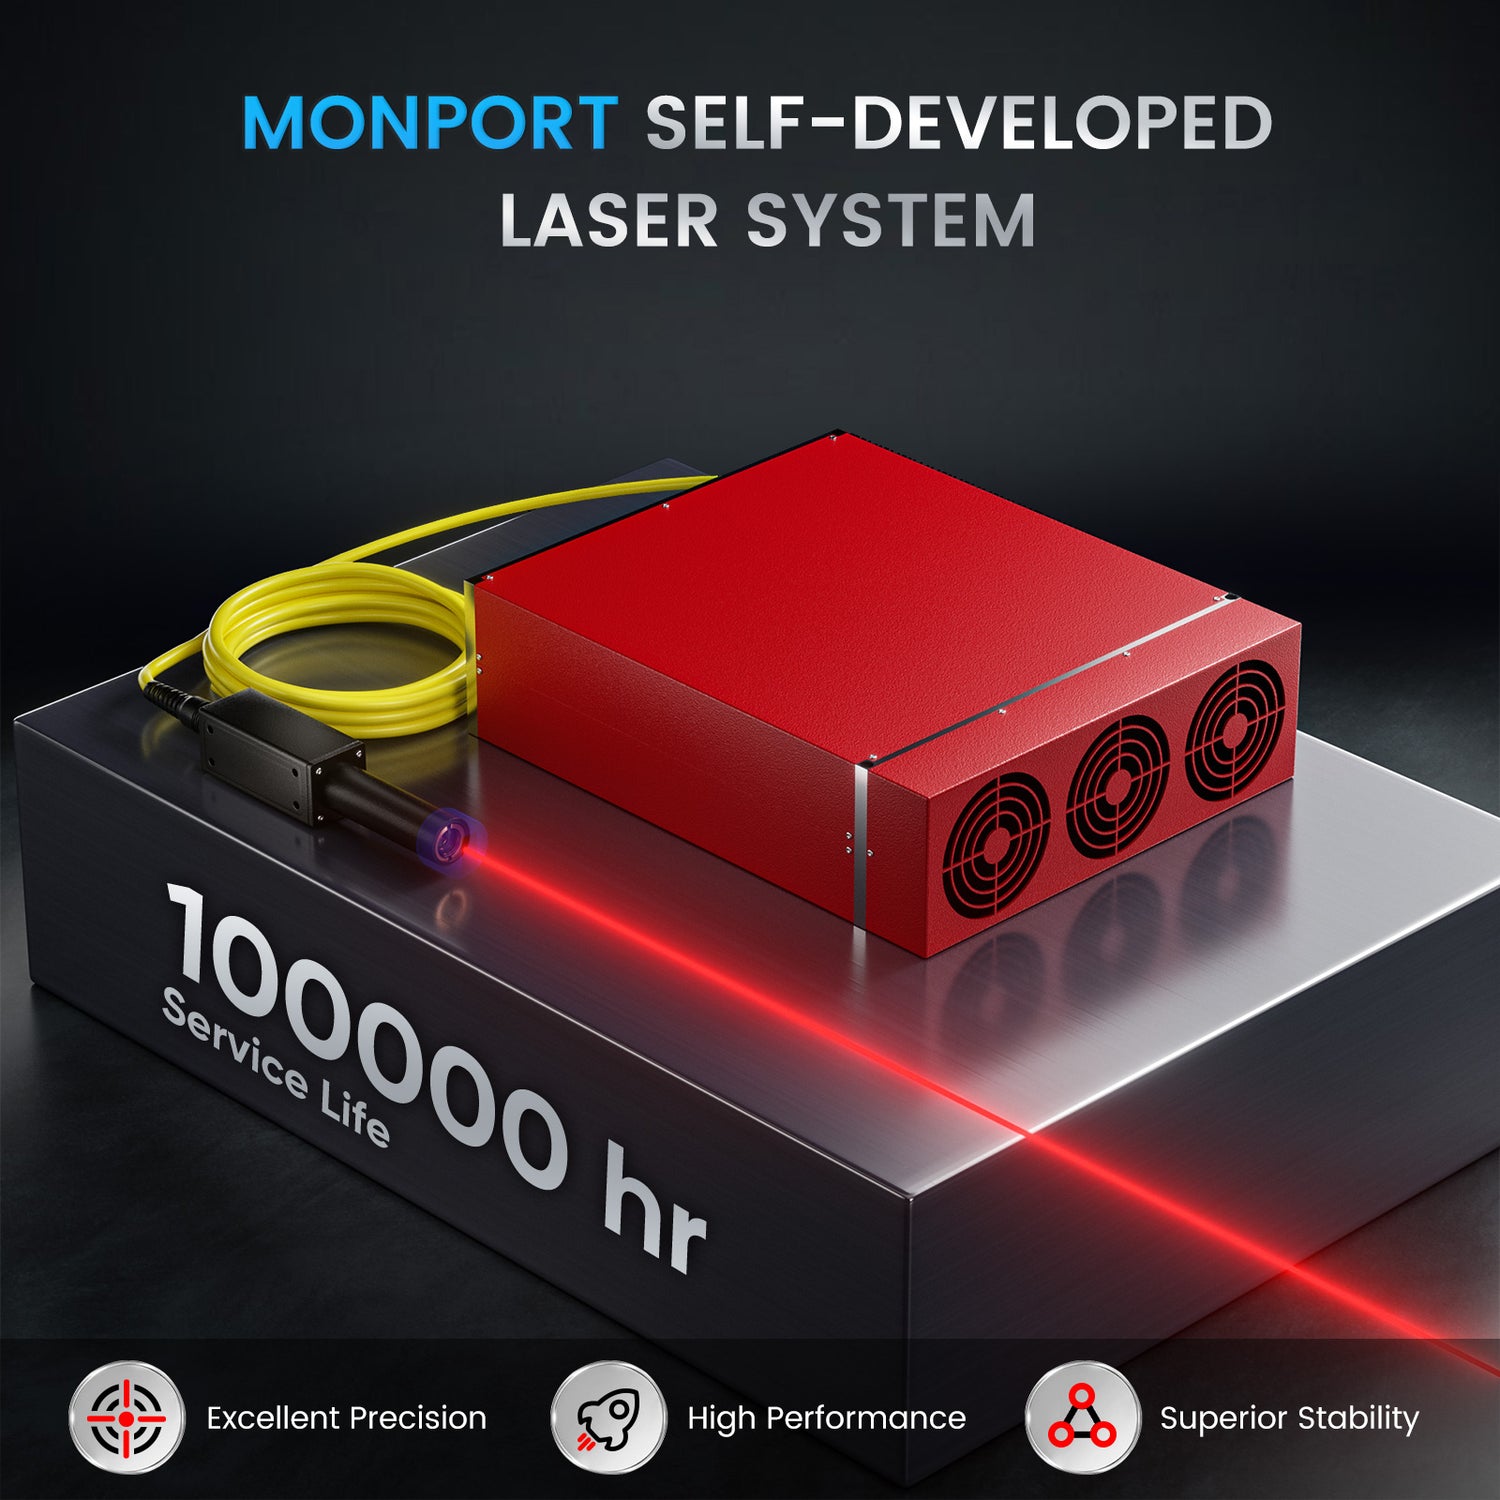 Powerful Laser Core & High-Performance Marking Controller